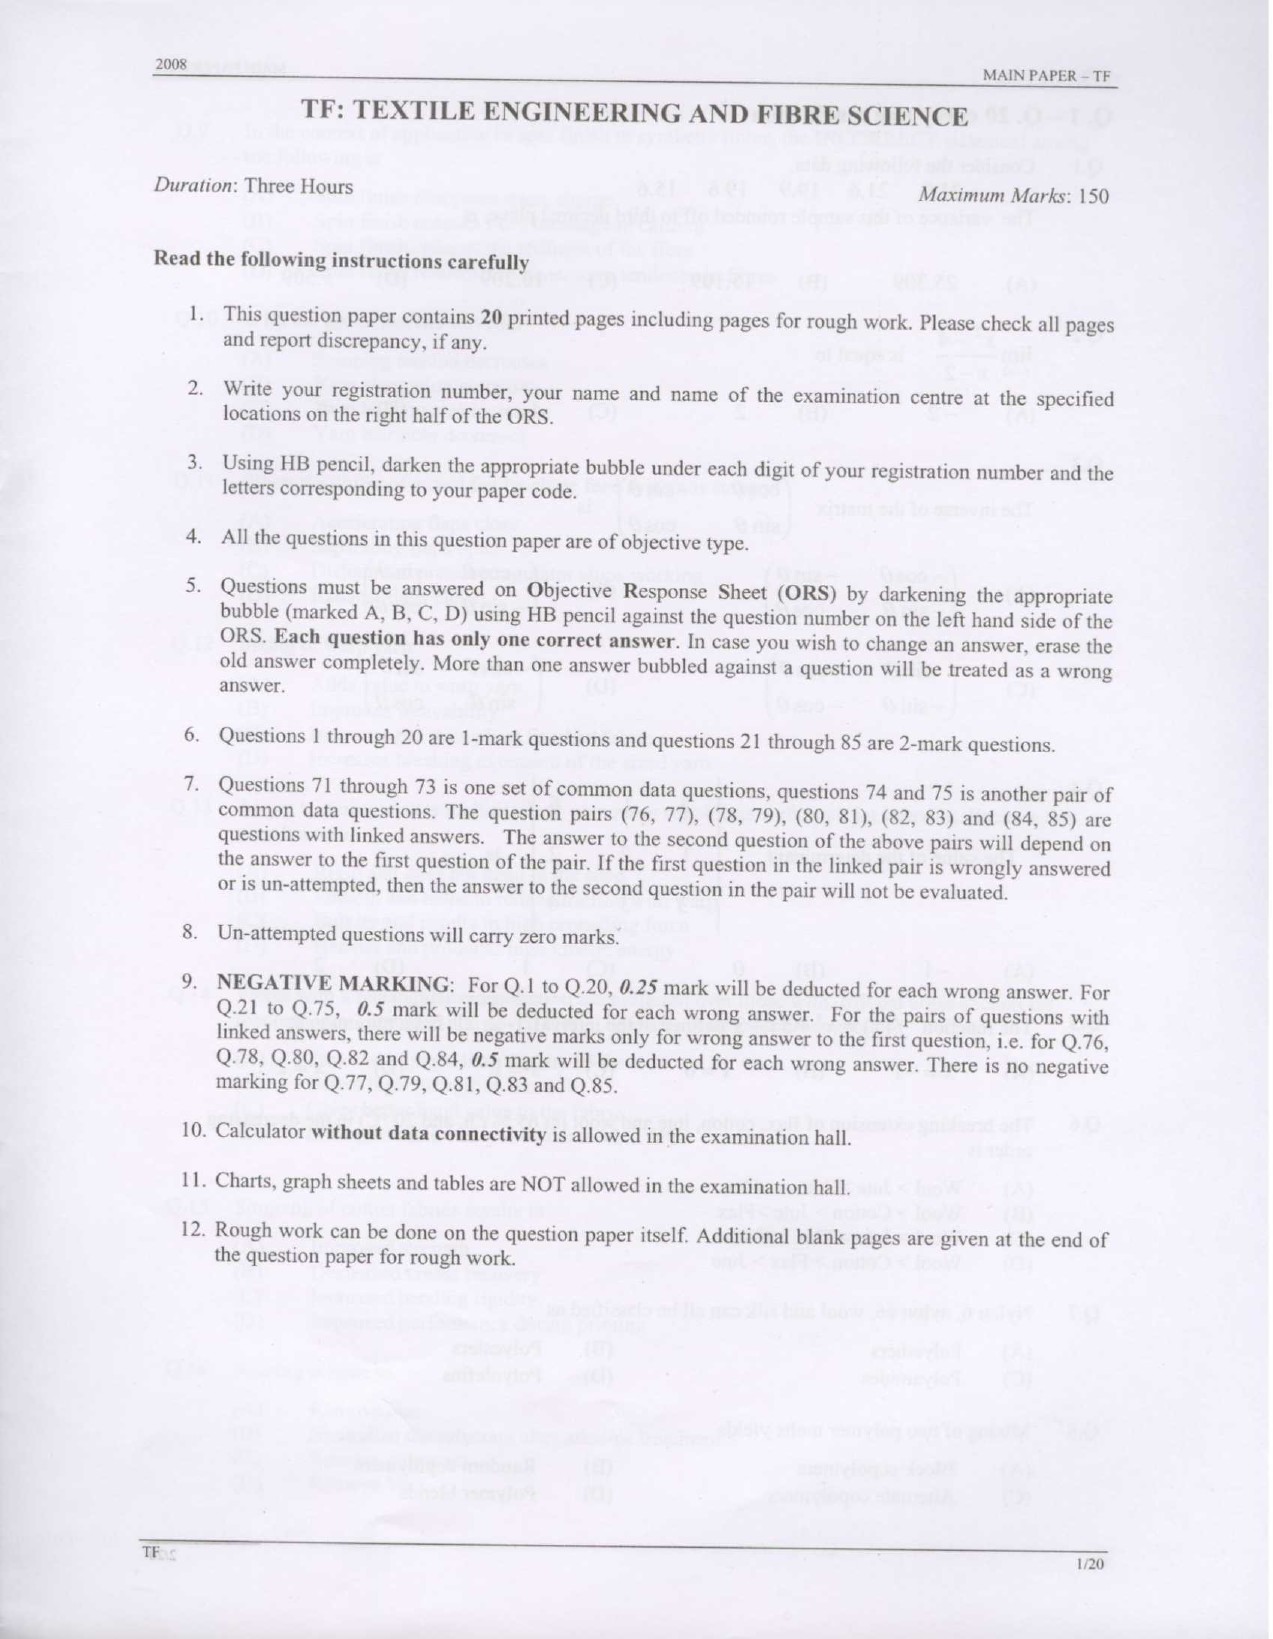 GATE Exam Question Paper 2008 Textile Engineering and Fibre Science 1